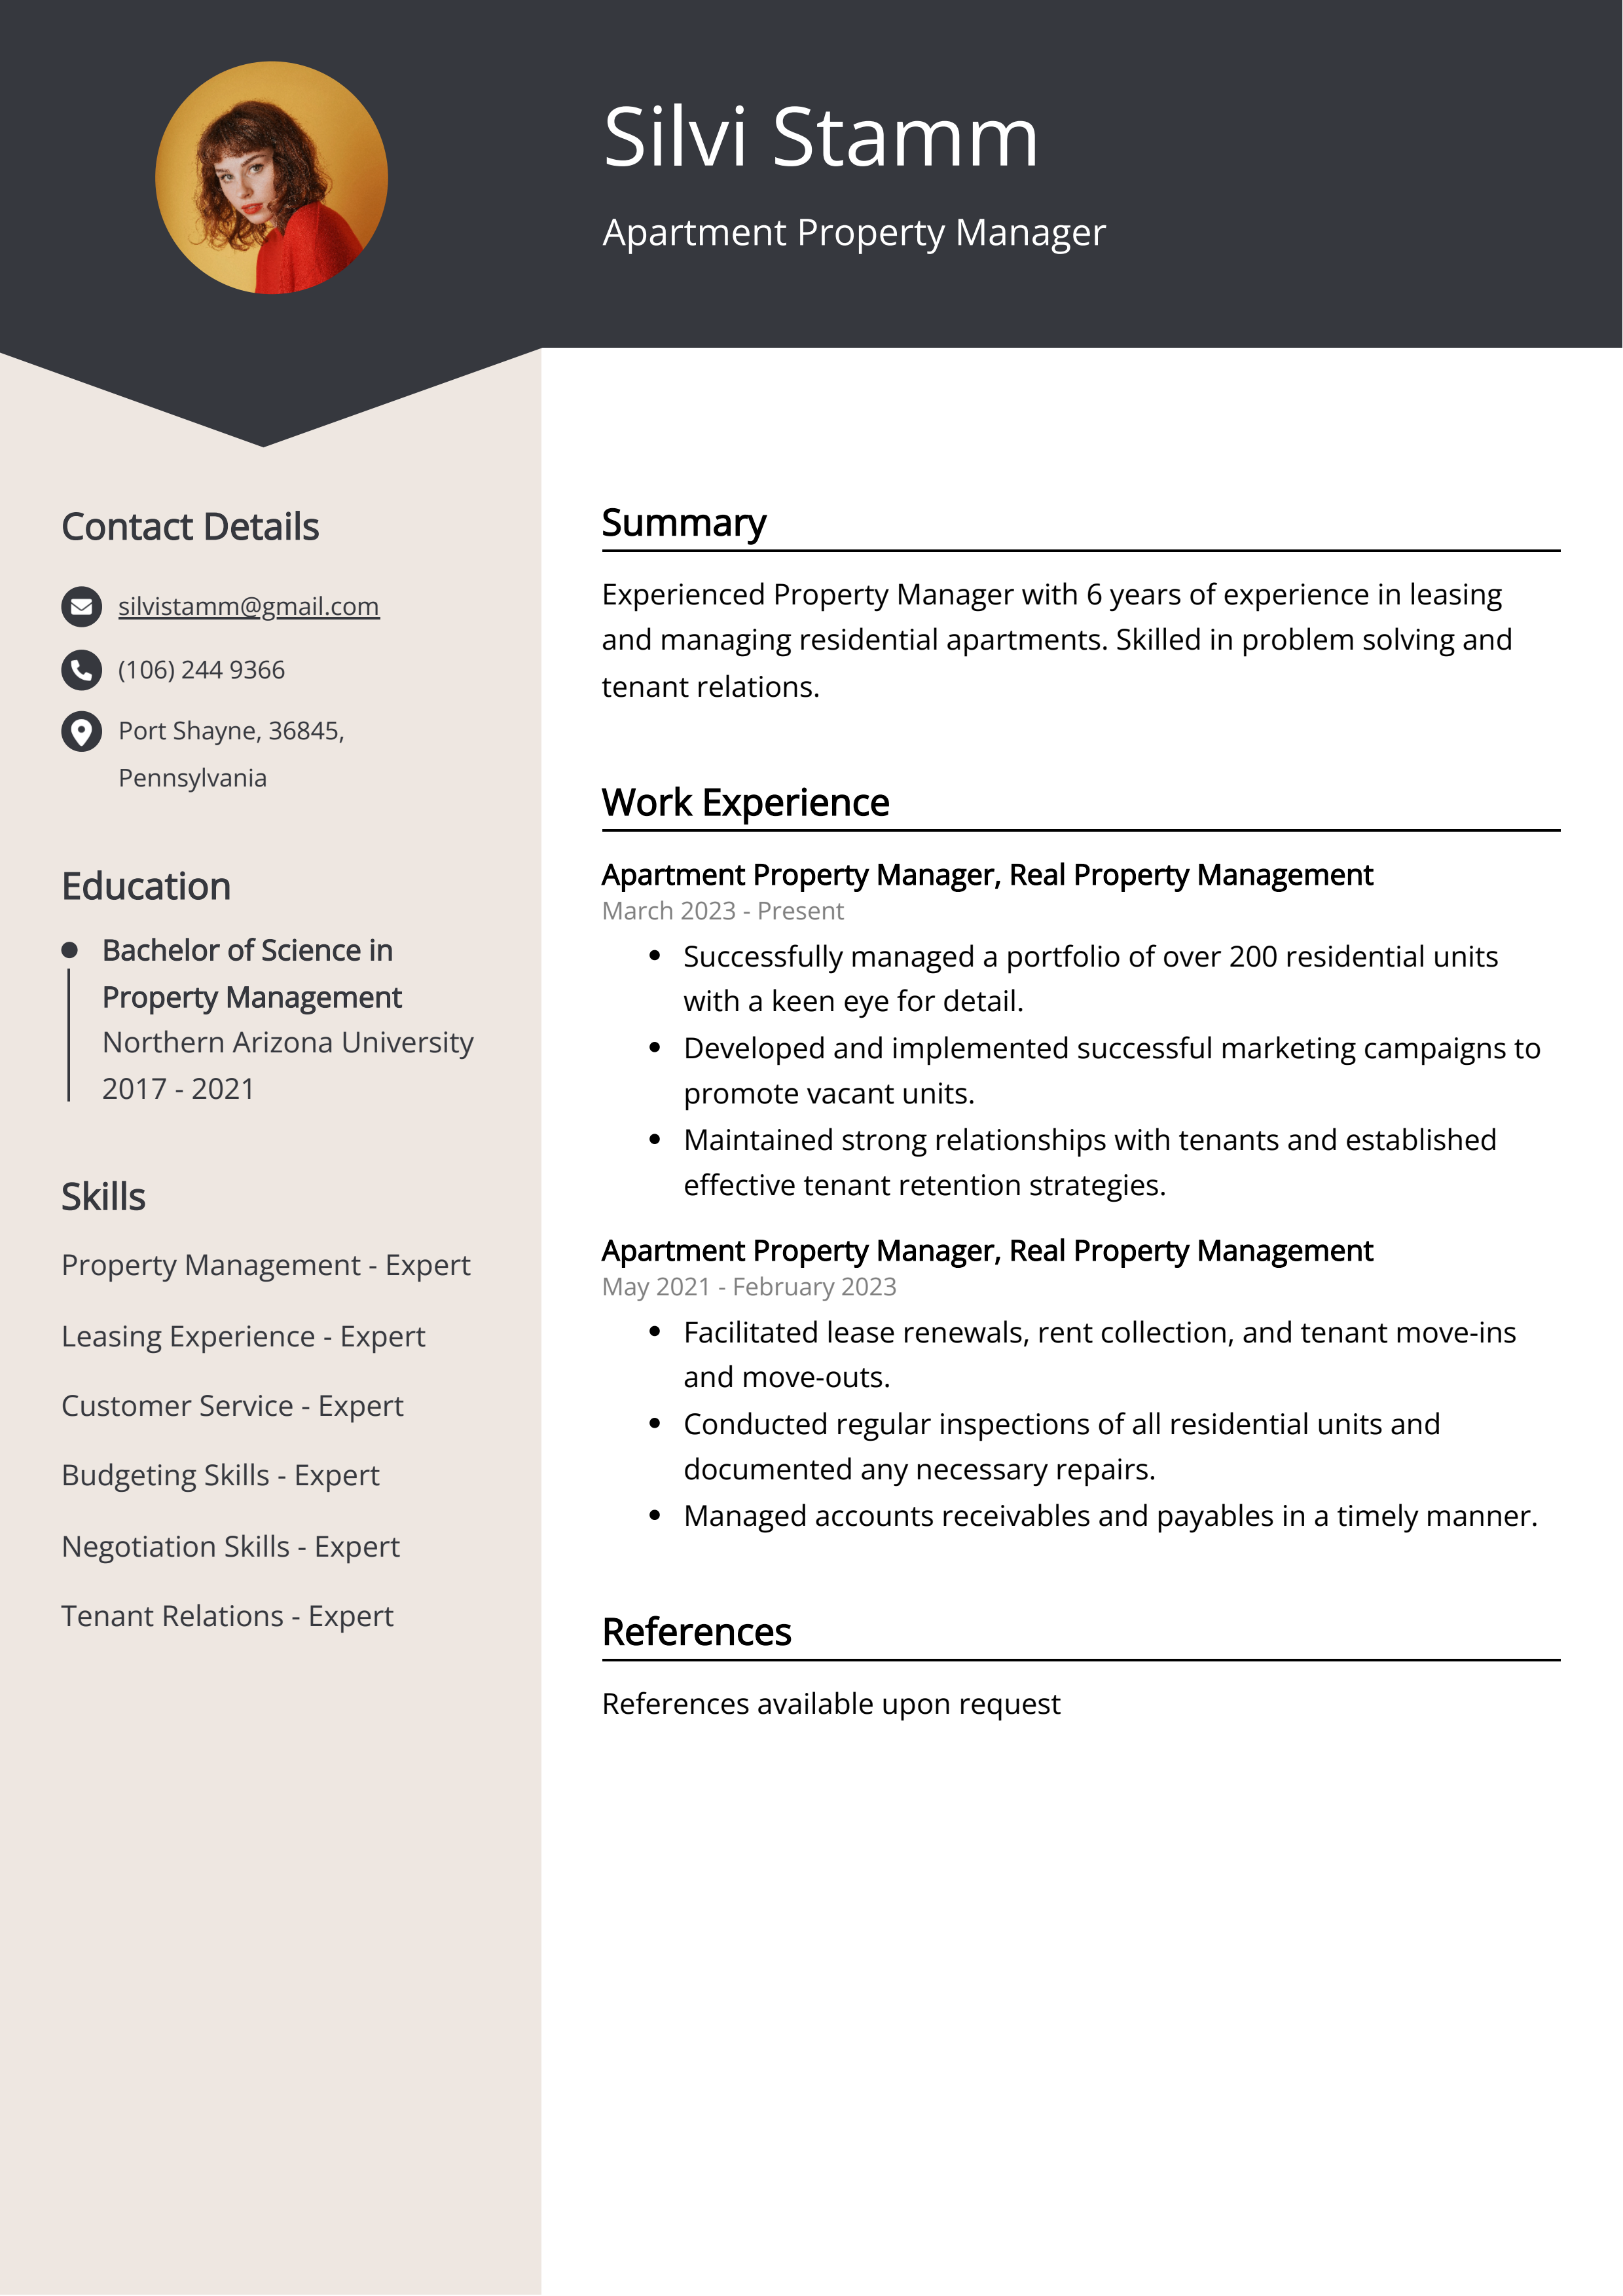 Apartment Property Manager CV Example